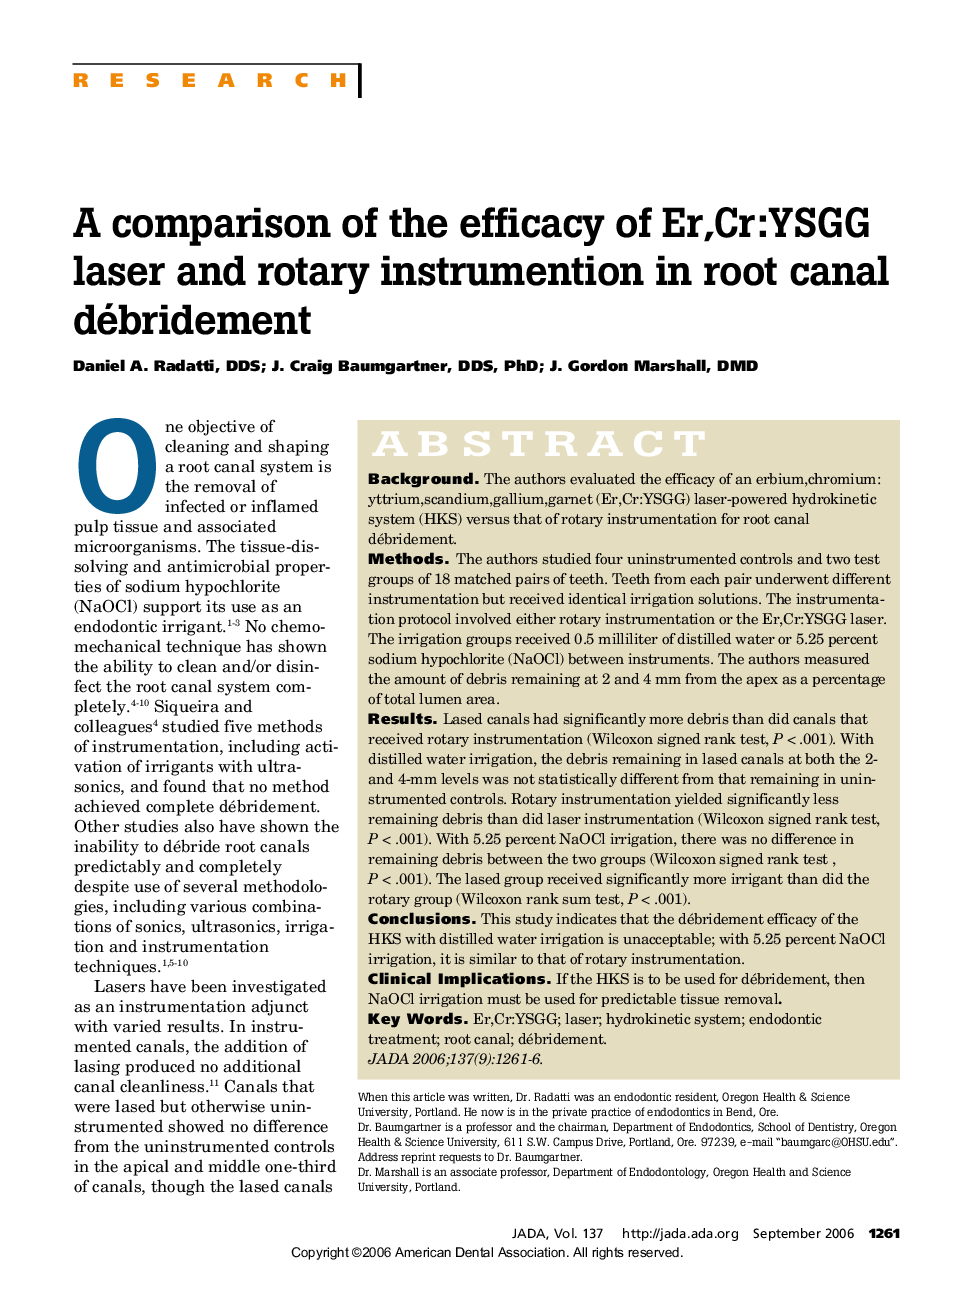 A comparison of the efficacy of Er,Cr:YSGG laser and rotary instrumention in root canal débridement